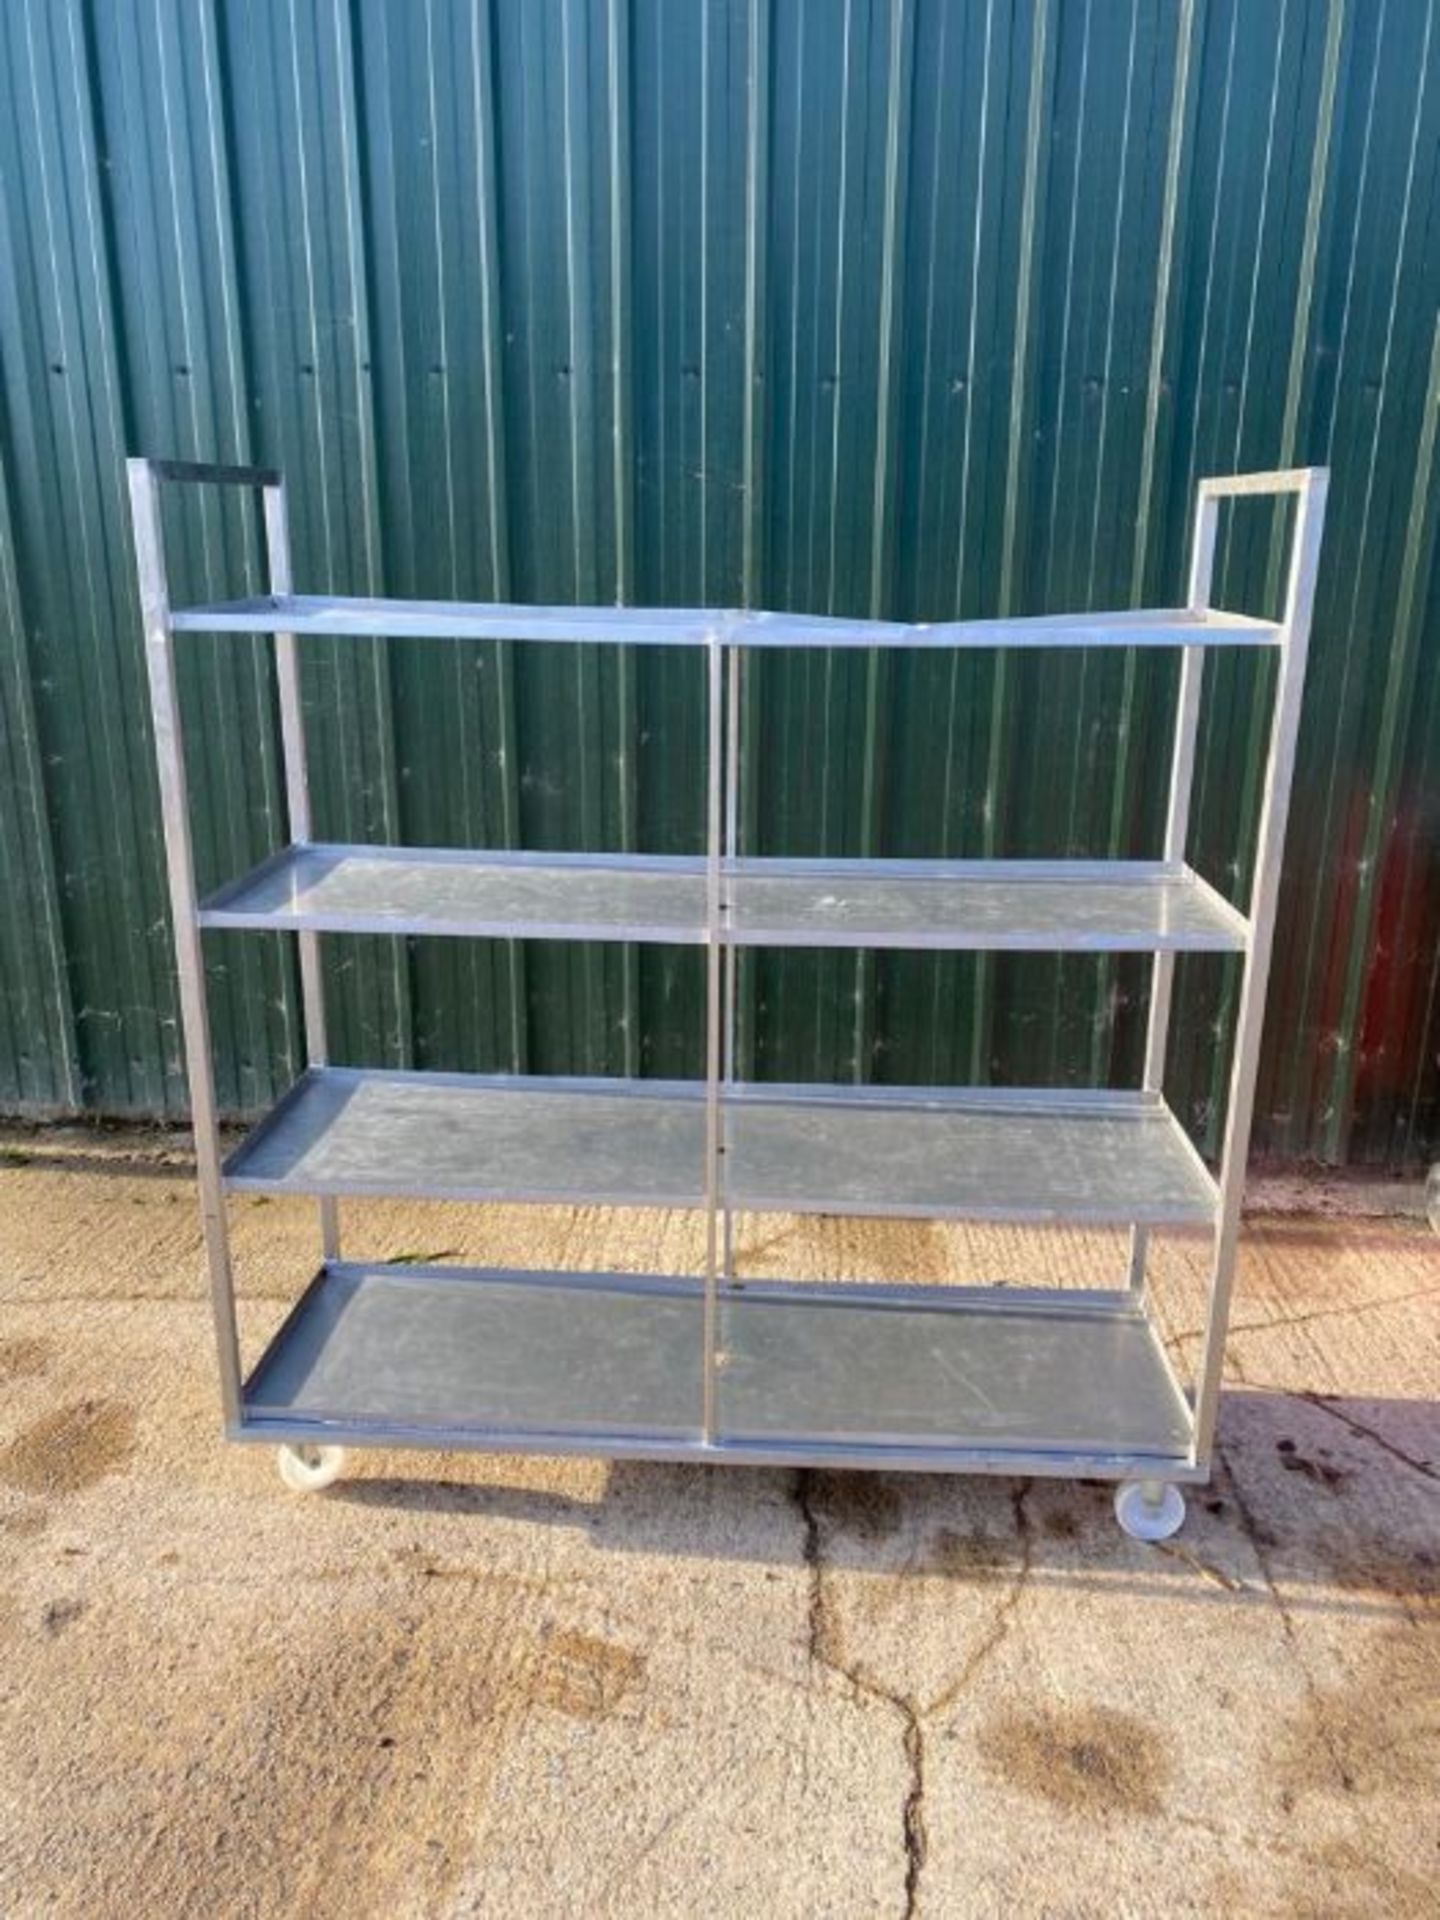 MOBILE STAINLESS STEEL TROLLEY